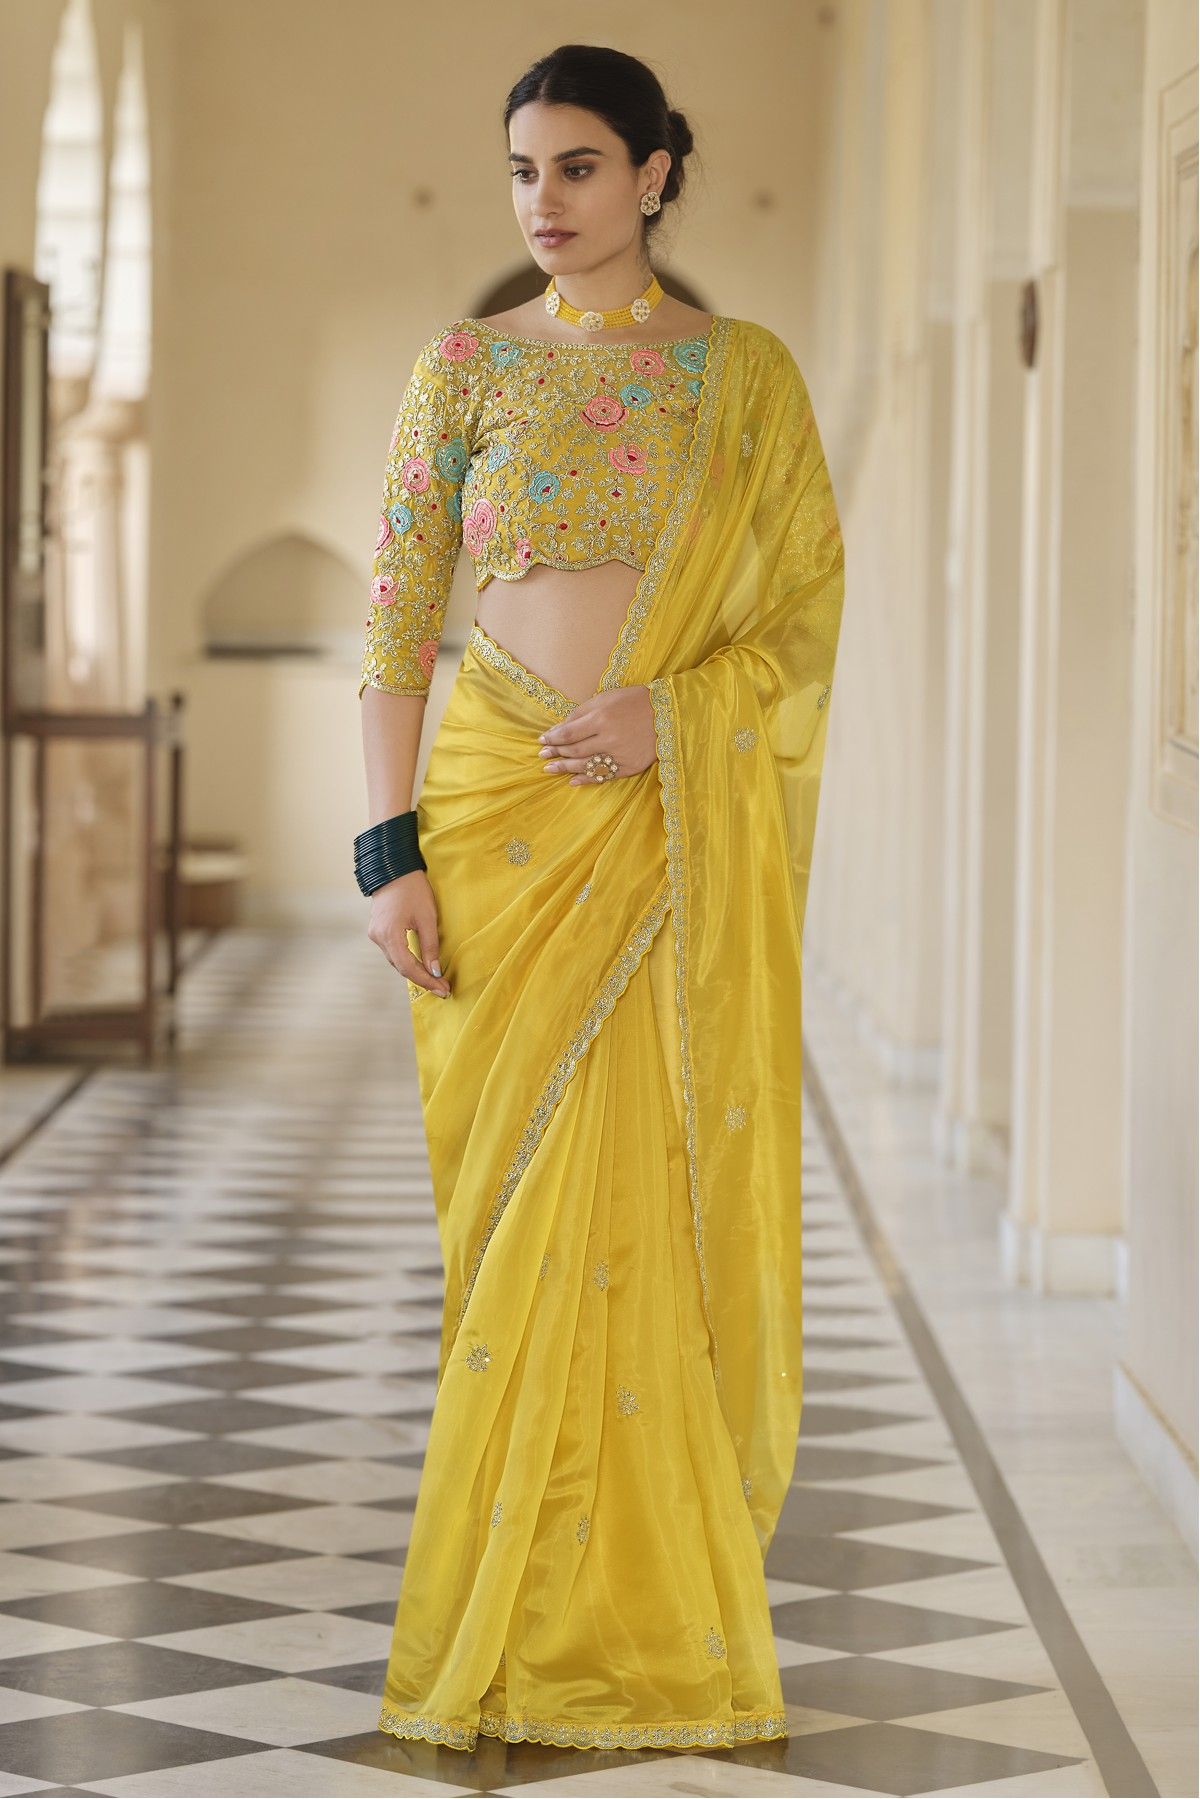 Designer Ready to Wear Saree for Yellow Colour Saree on Gorgette Febric  With Digital Print Party Wear Saree Indian Wedding Saree - Etsy